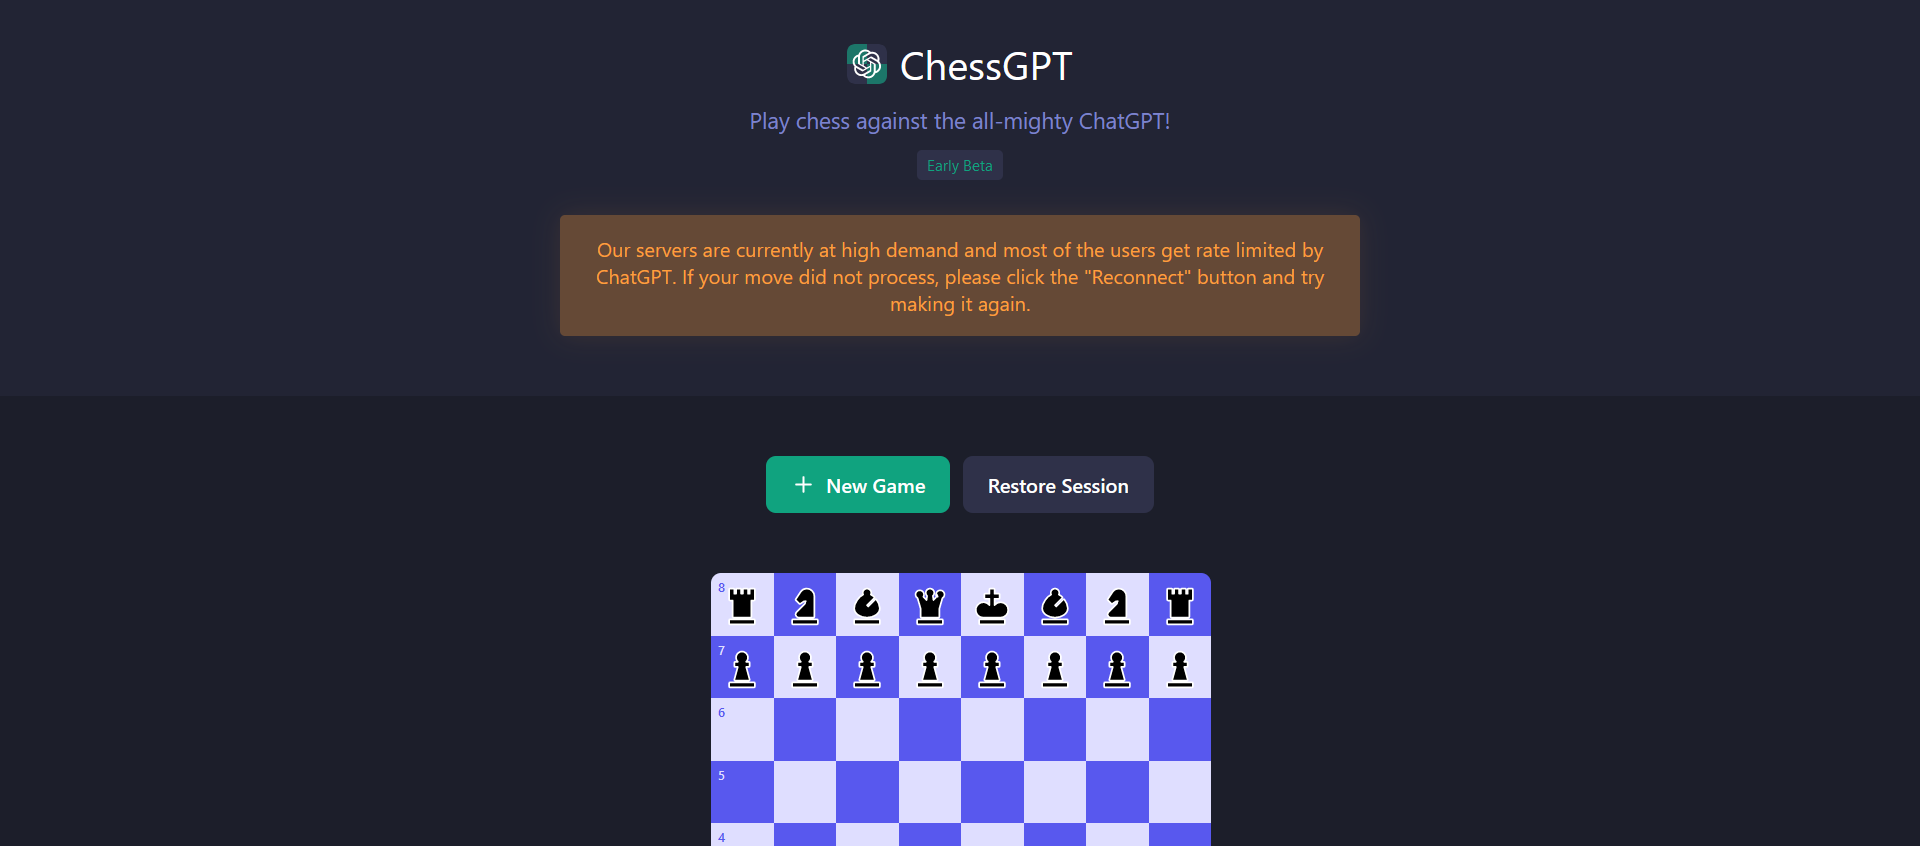 ChessGPT - Features, Pricing, Pros & Cons